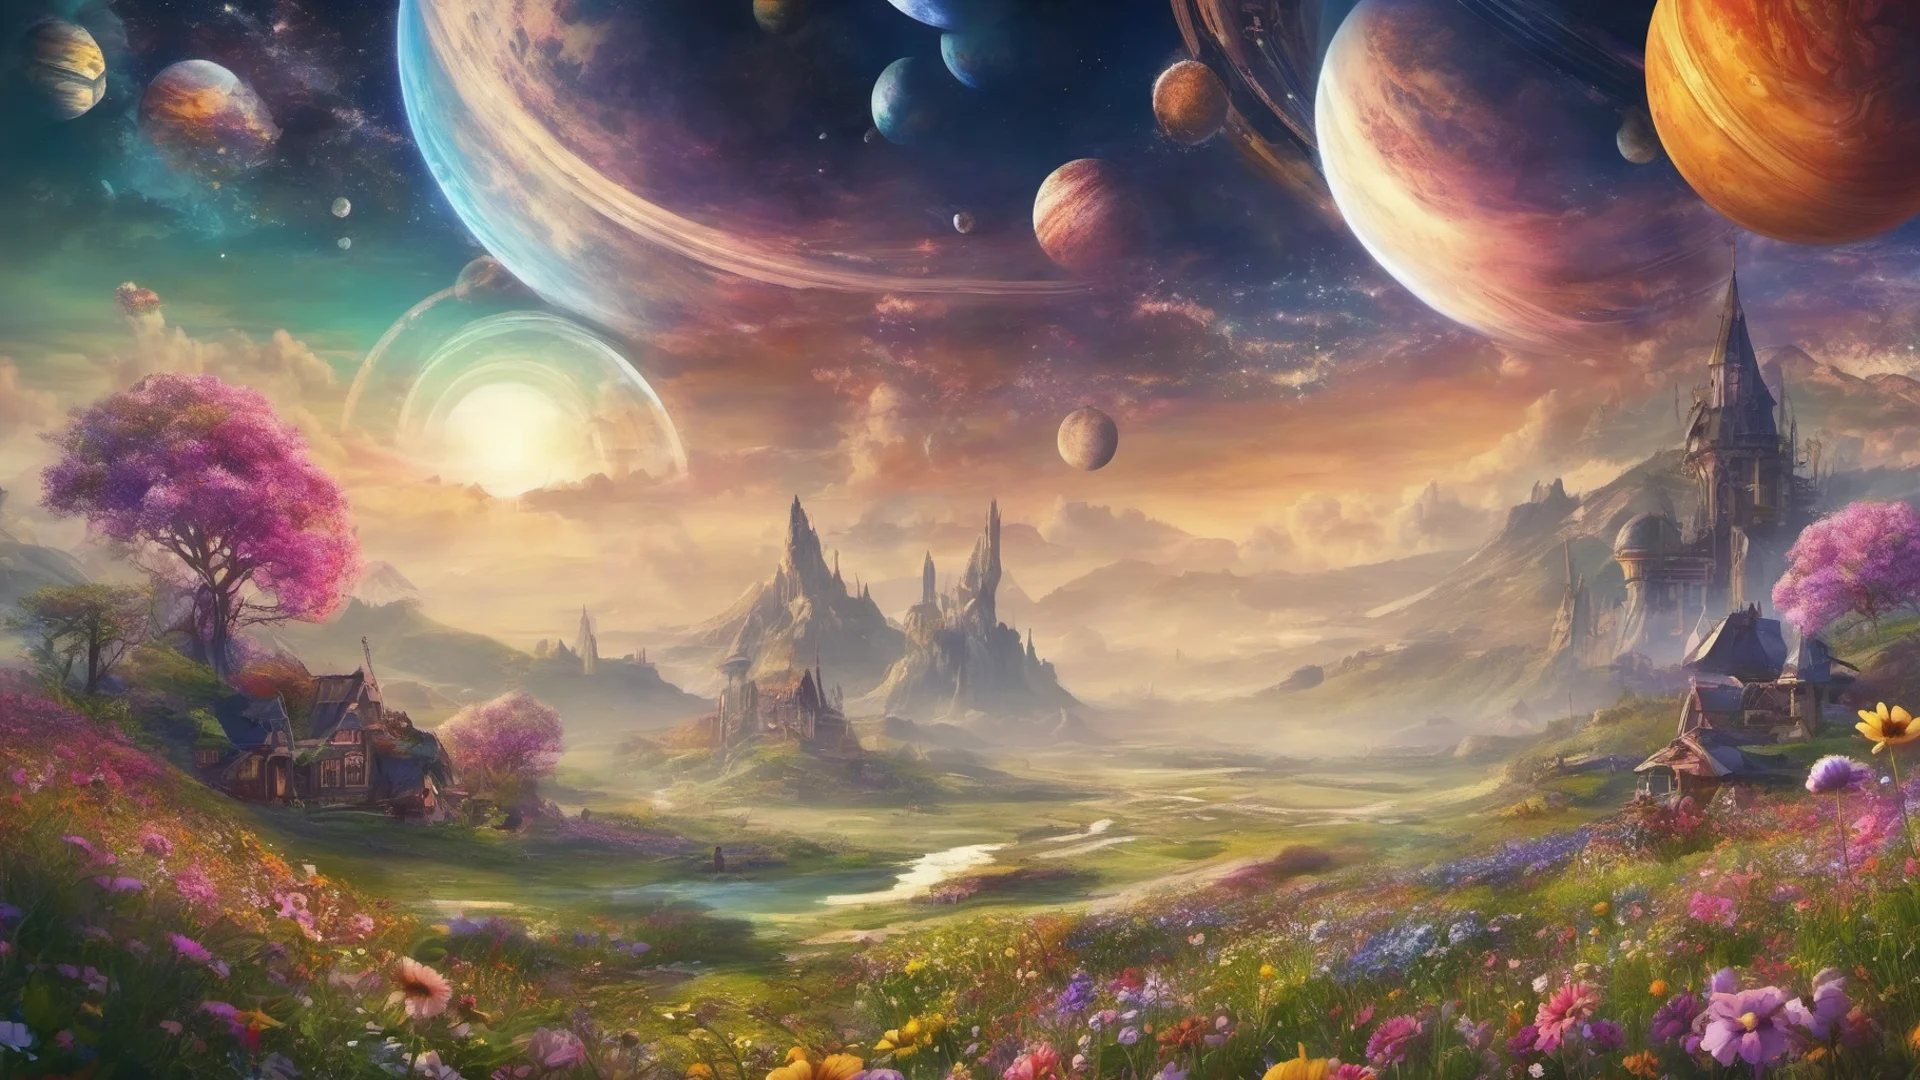 epic fantasy background colorful flower meadows village covered in flowers two saturn ringed planets overhead good looking trending fantastic 1 wide